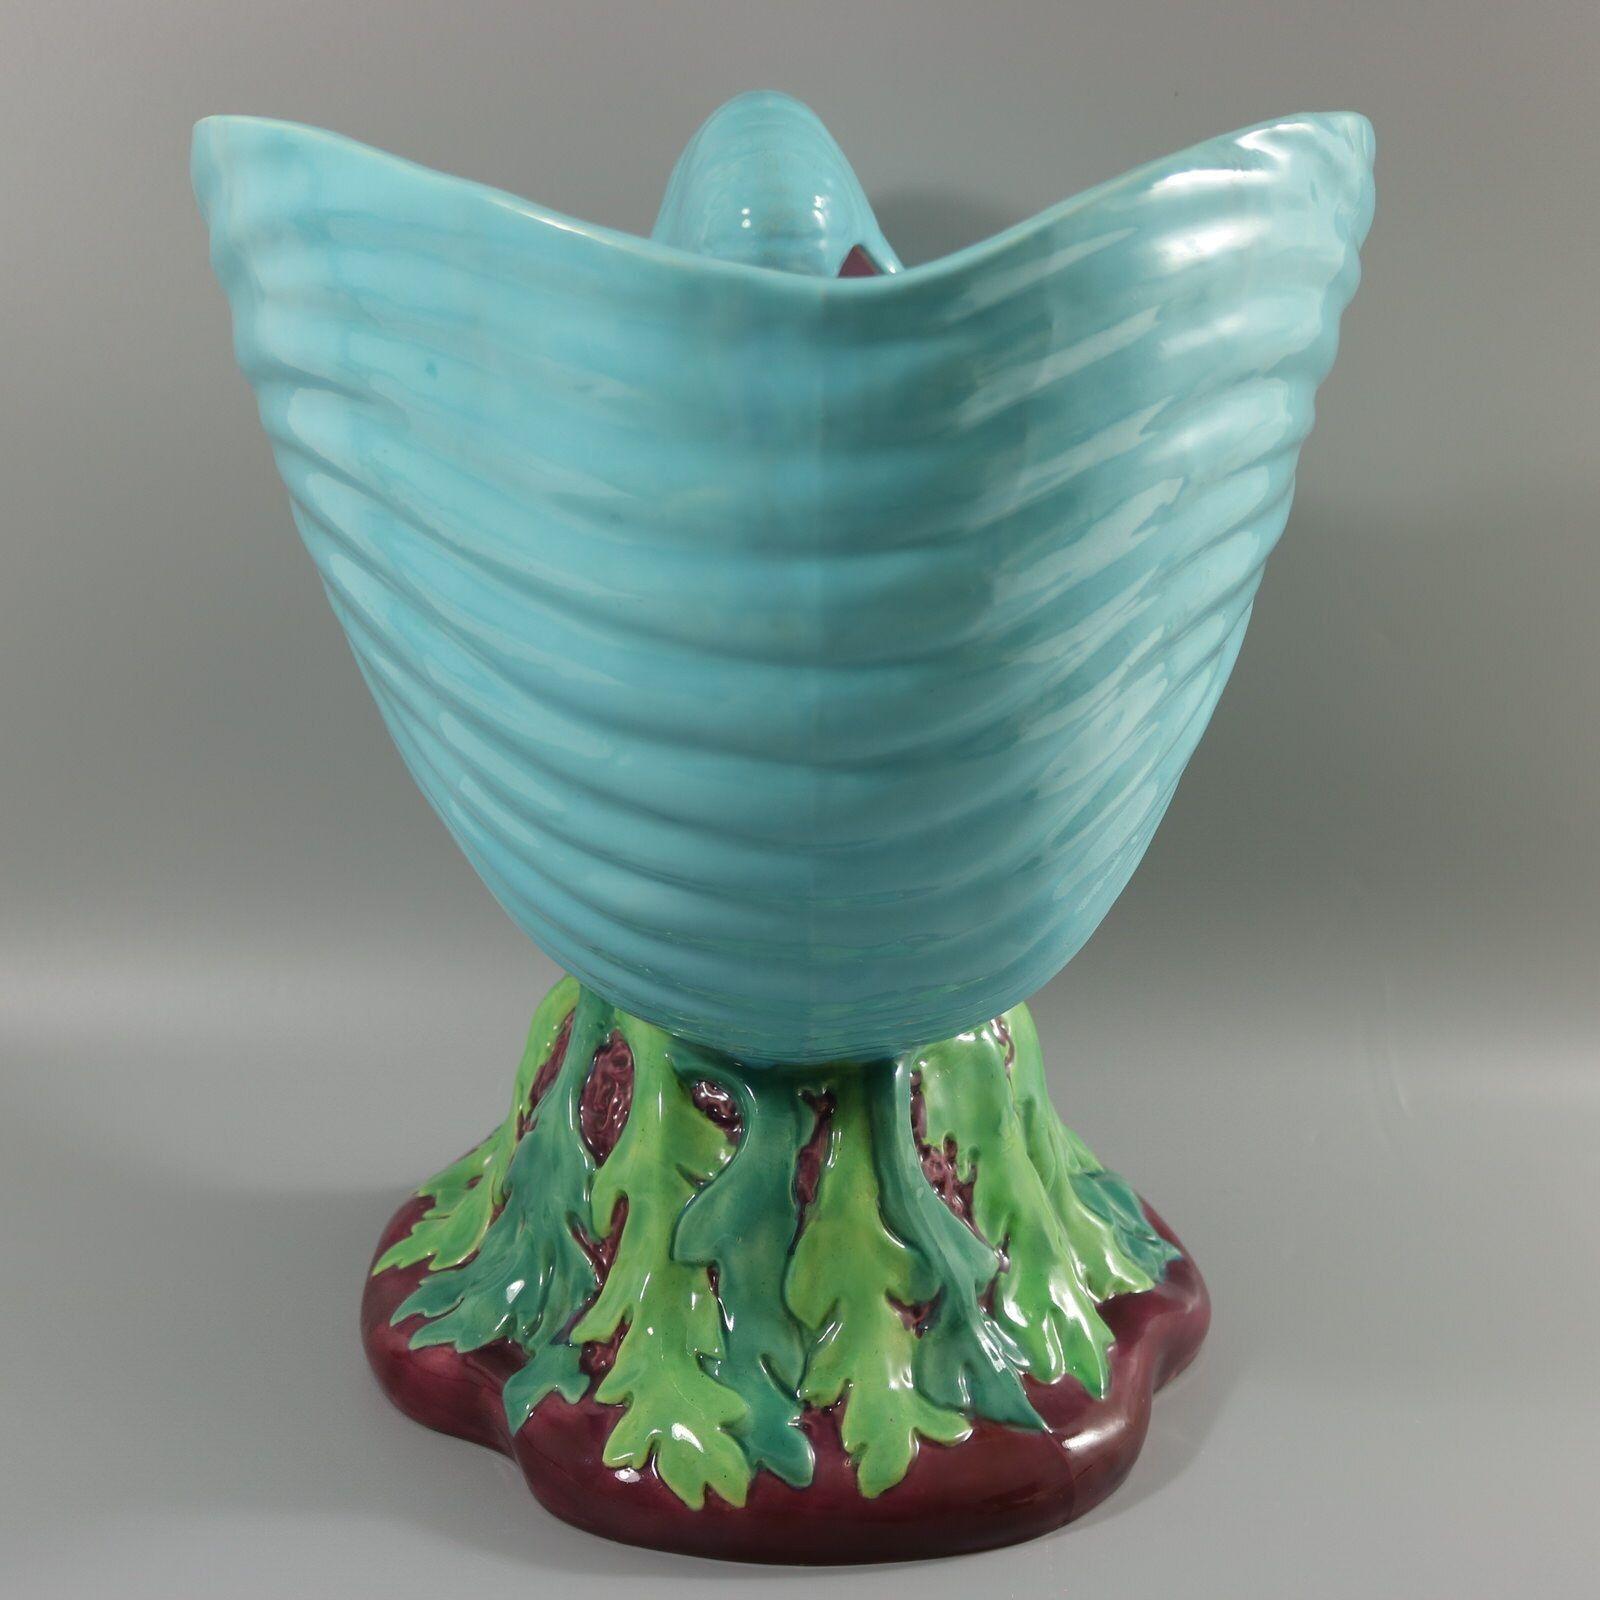 Minton Majolica flower pot (jardiniere) which features a nautilus shell on a coral-like base which is draped in seaweed. Colouration: turquoise, green, magenta, are predominant. The piece bears maker's marks for the Minton pottery. Bears a pattern